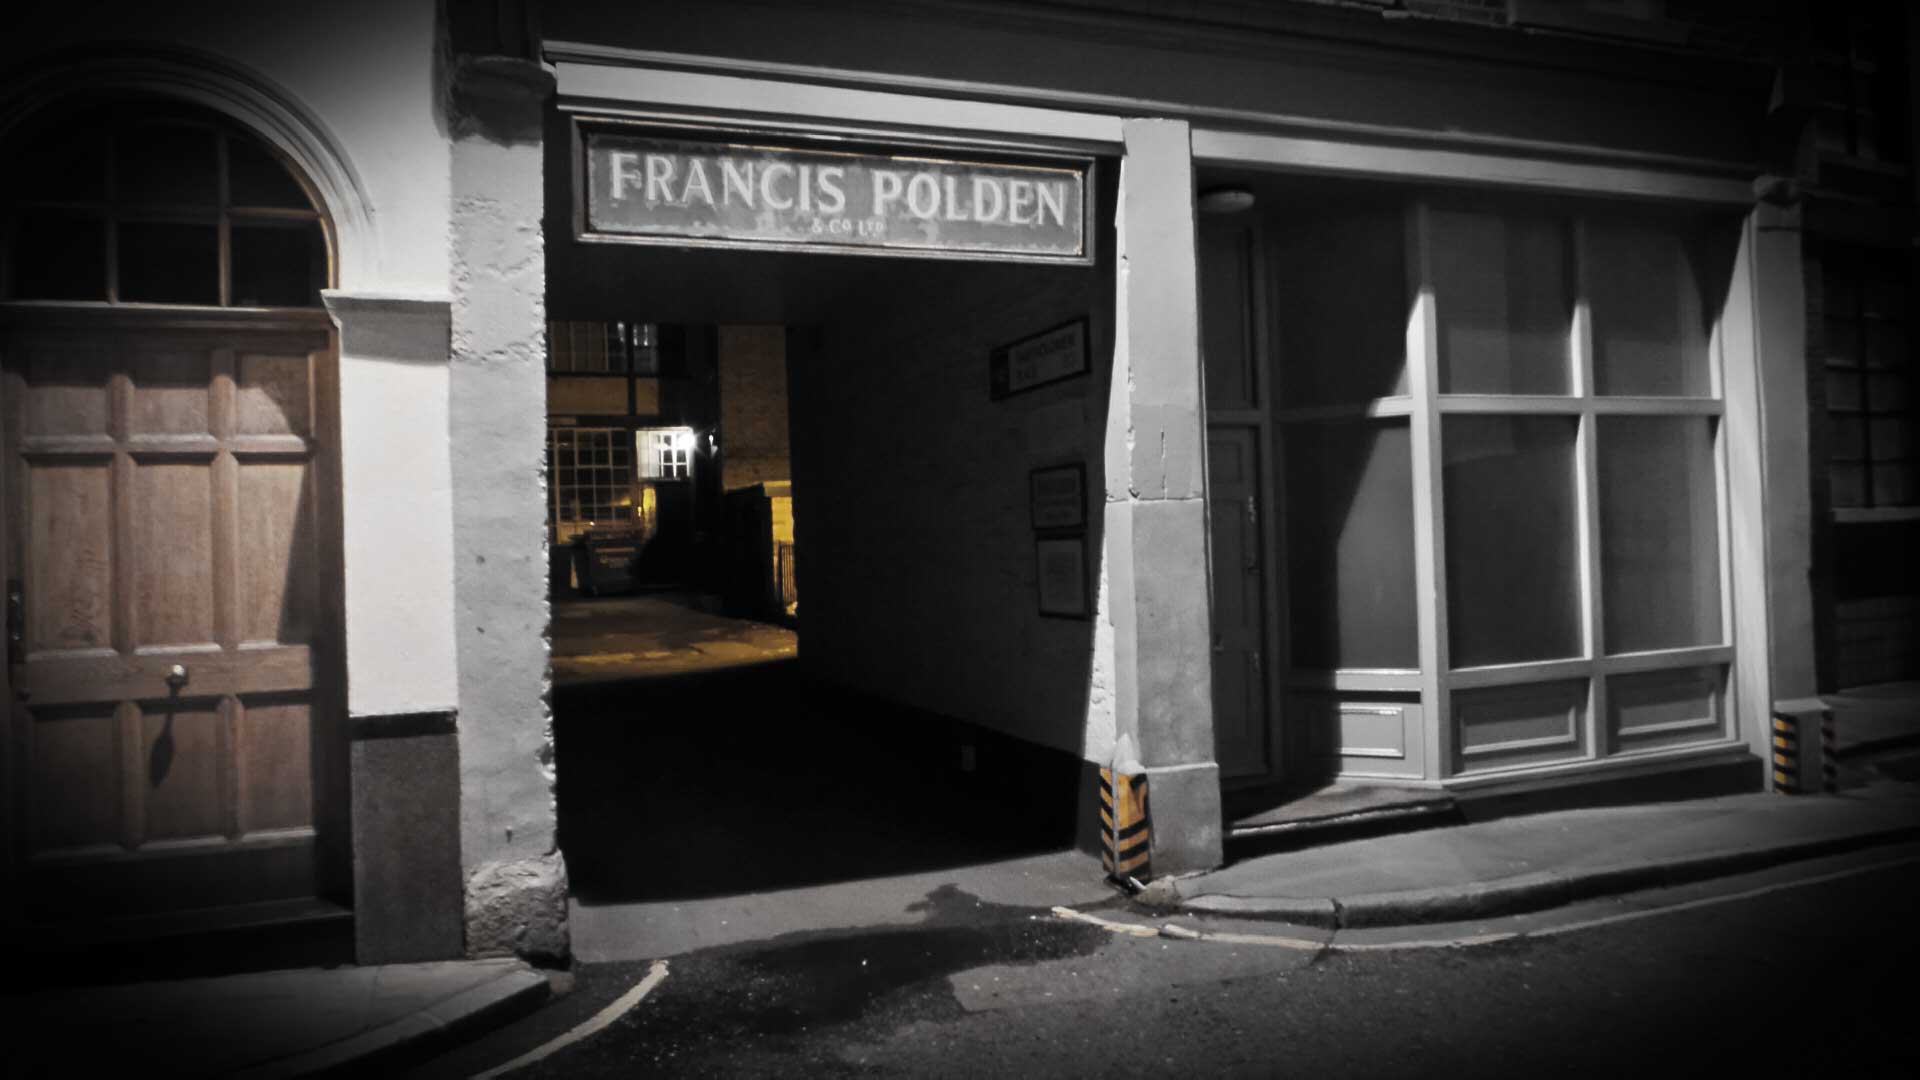 The sign for Francis Polden's premises.